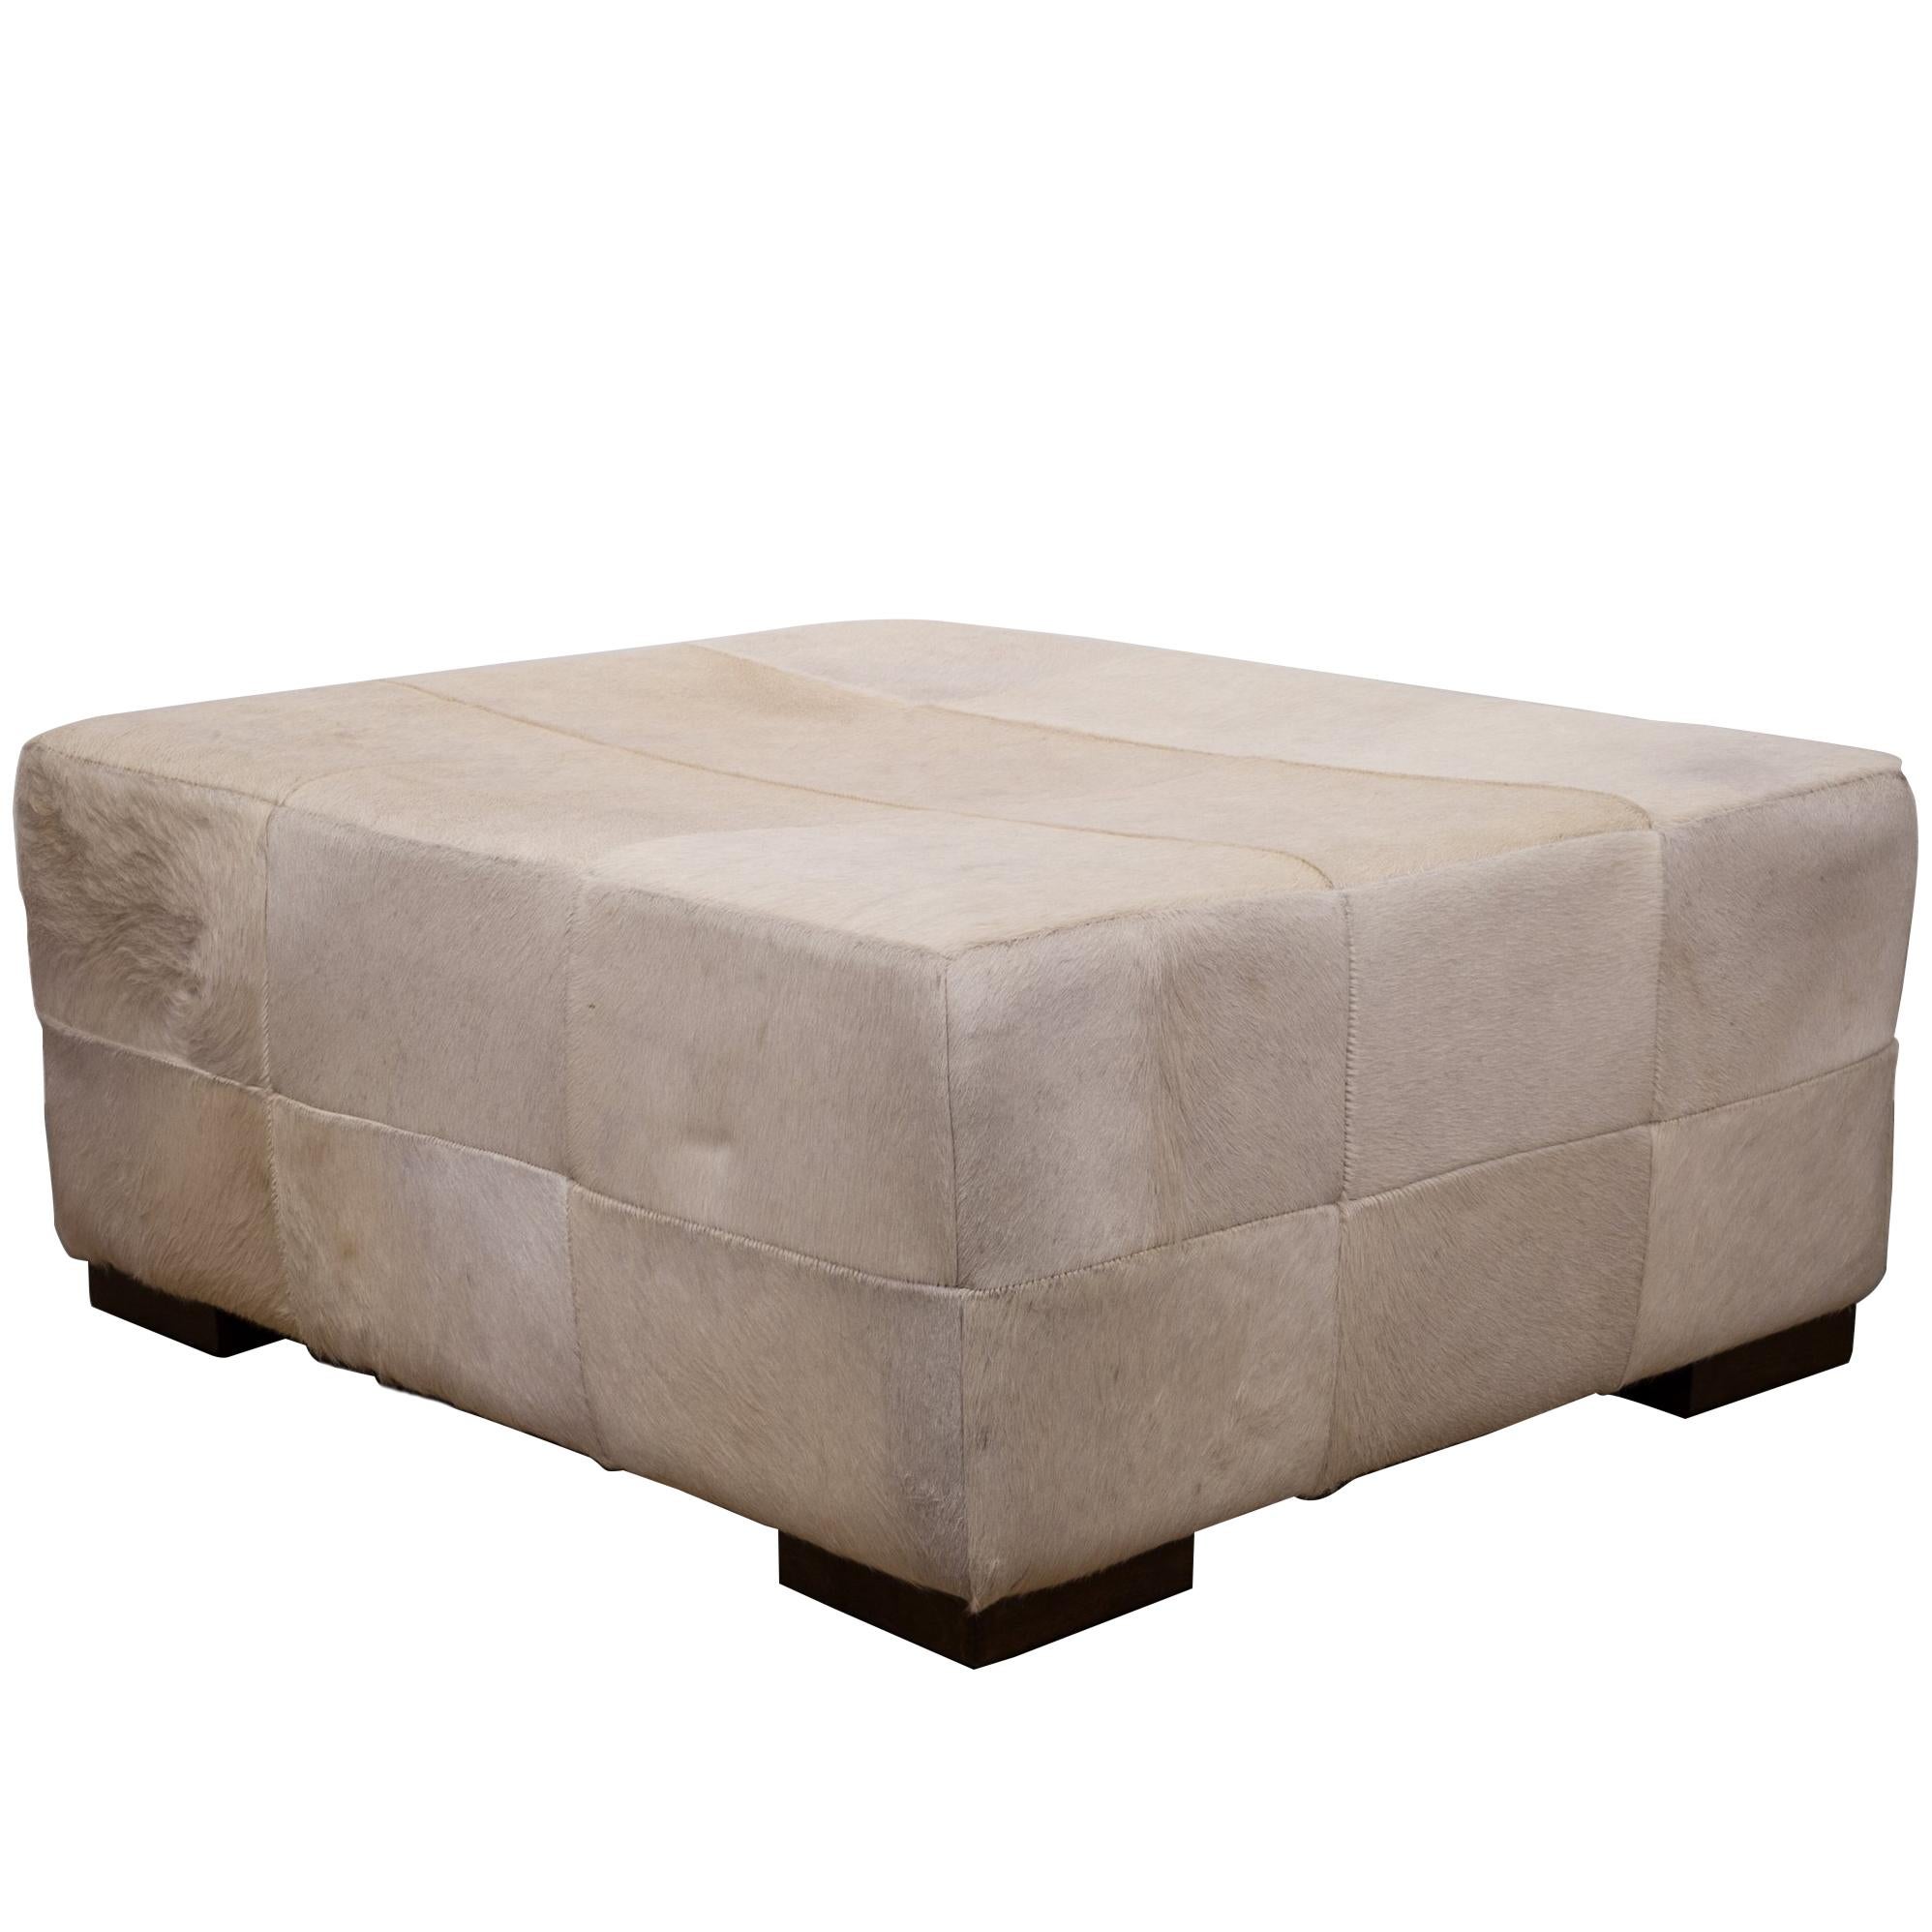 Large White Patchwork Cowhide Ottoman